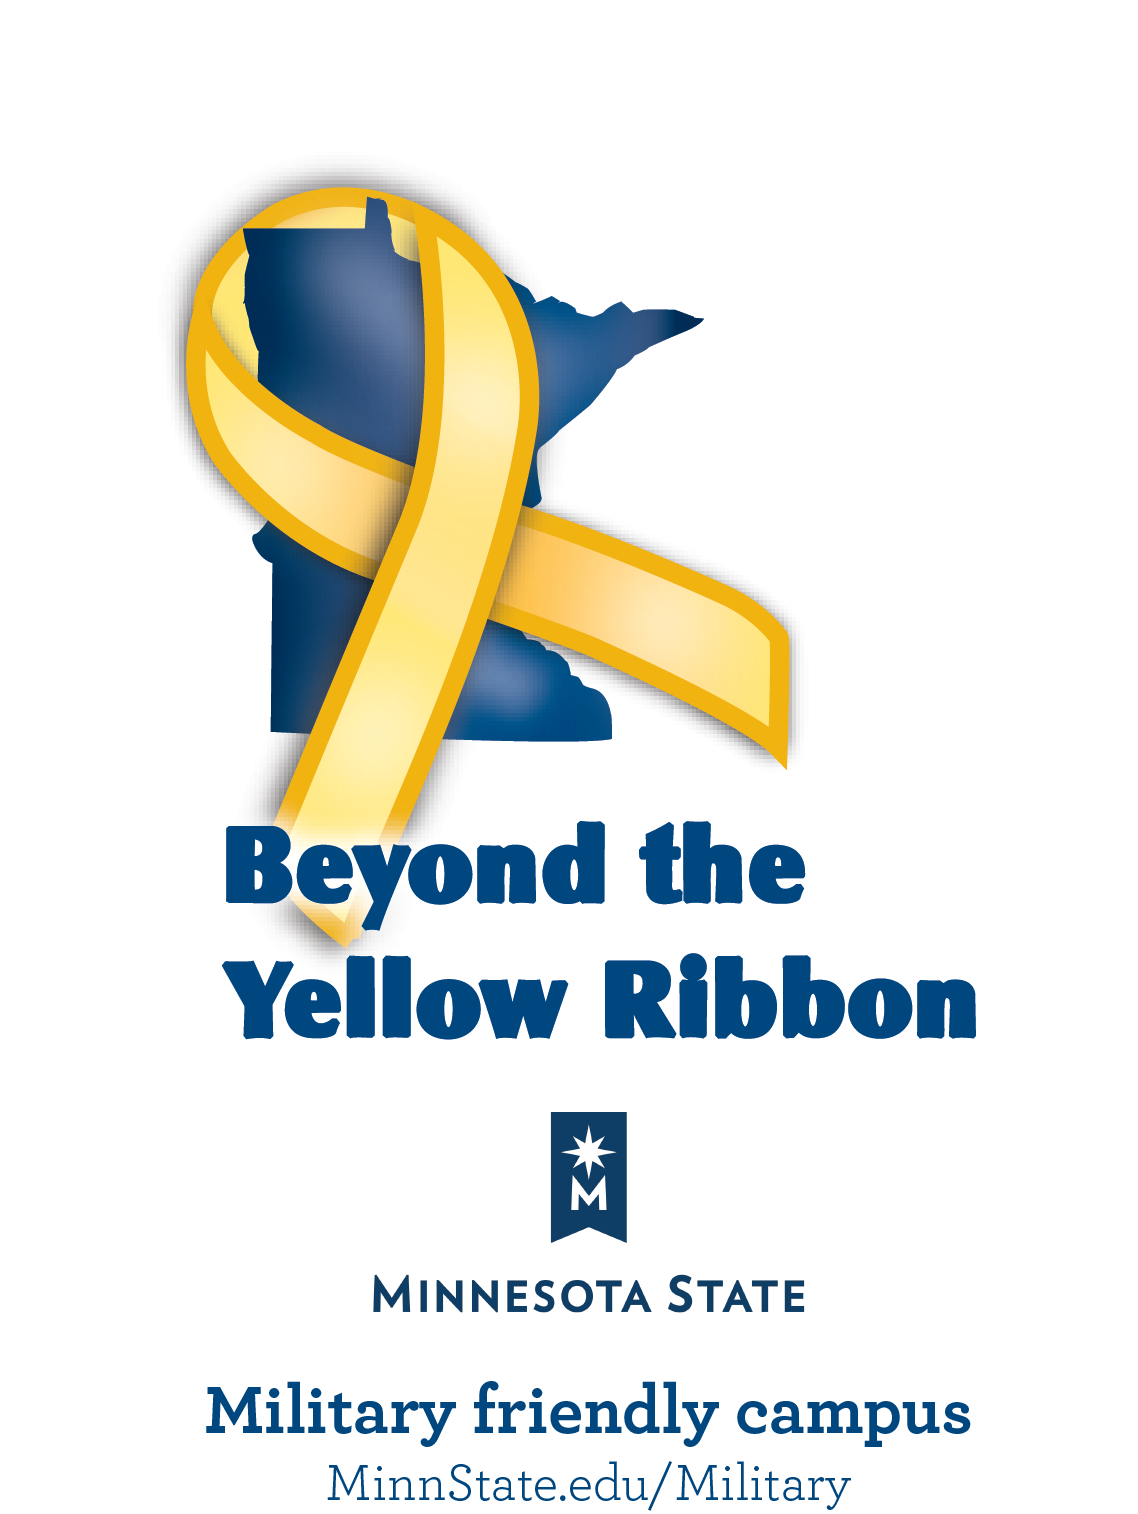 Minnesota State Military Friendly Campus - Beyond the Yellow Ribbon